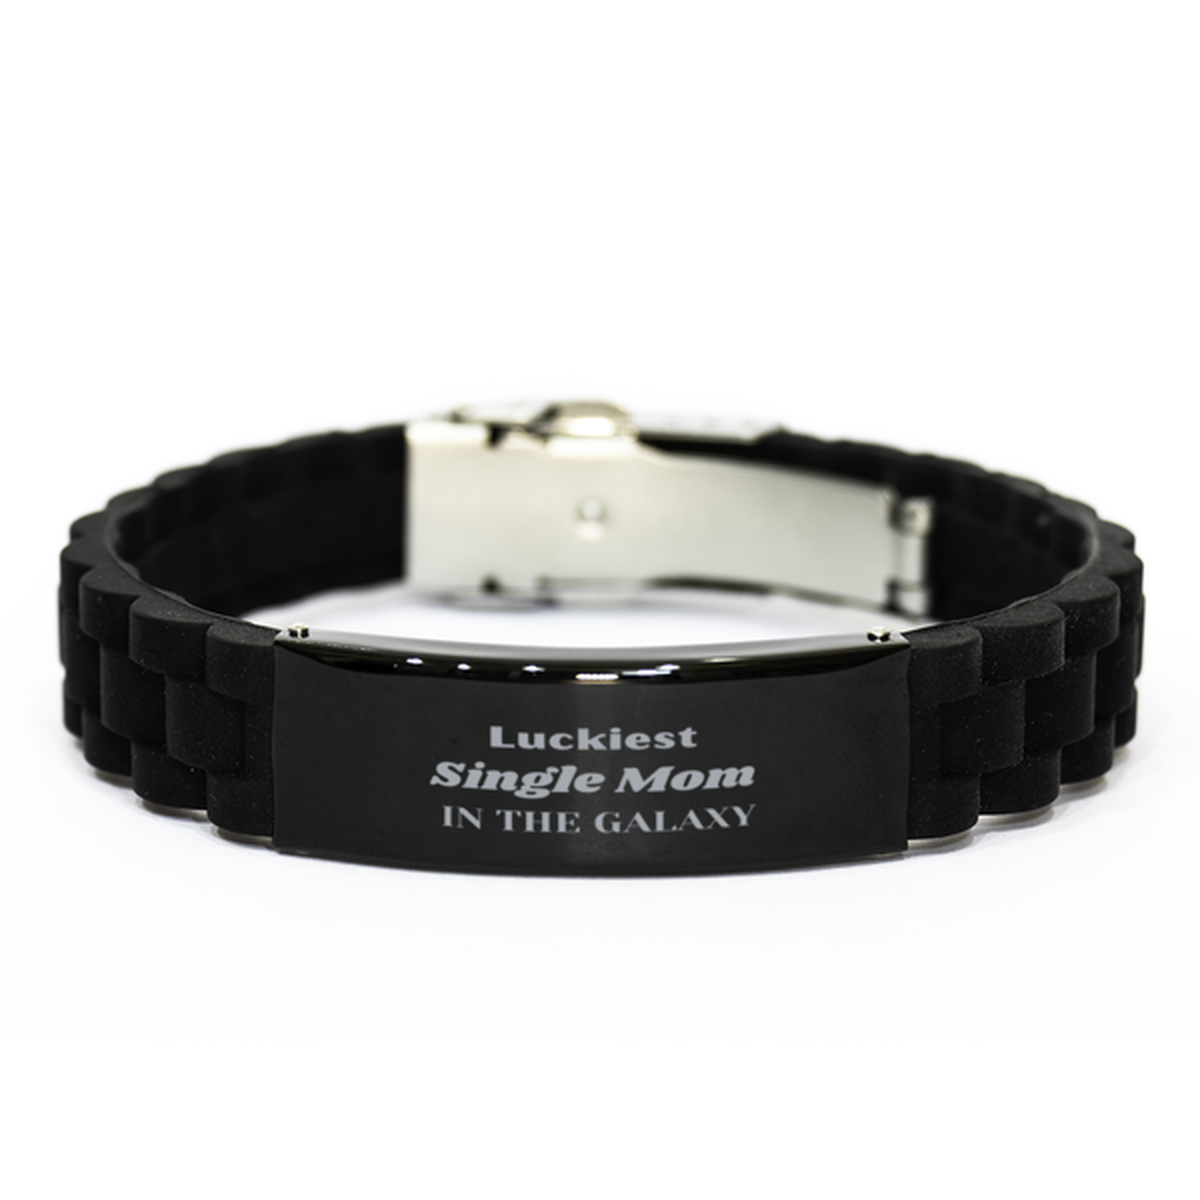 Luckiest Single Mom in the Galaxy, To My Single Mom Engraved Gifts, Christmas Single Mom Black Glidelock Clasp Bracelet Gifts, X-mas Birthday Unique Gifts For Single Mom Men Women